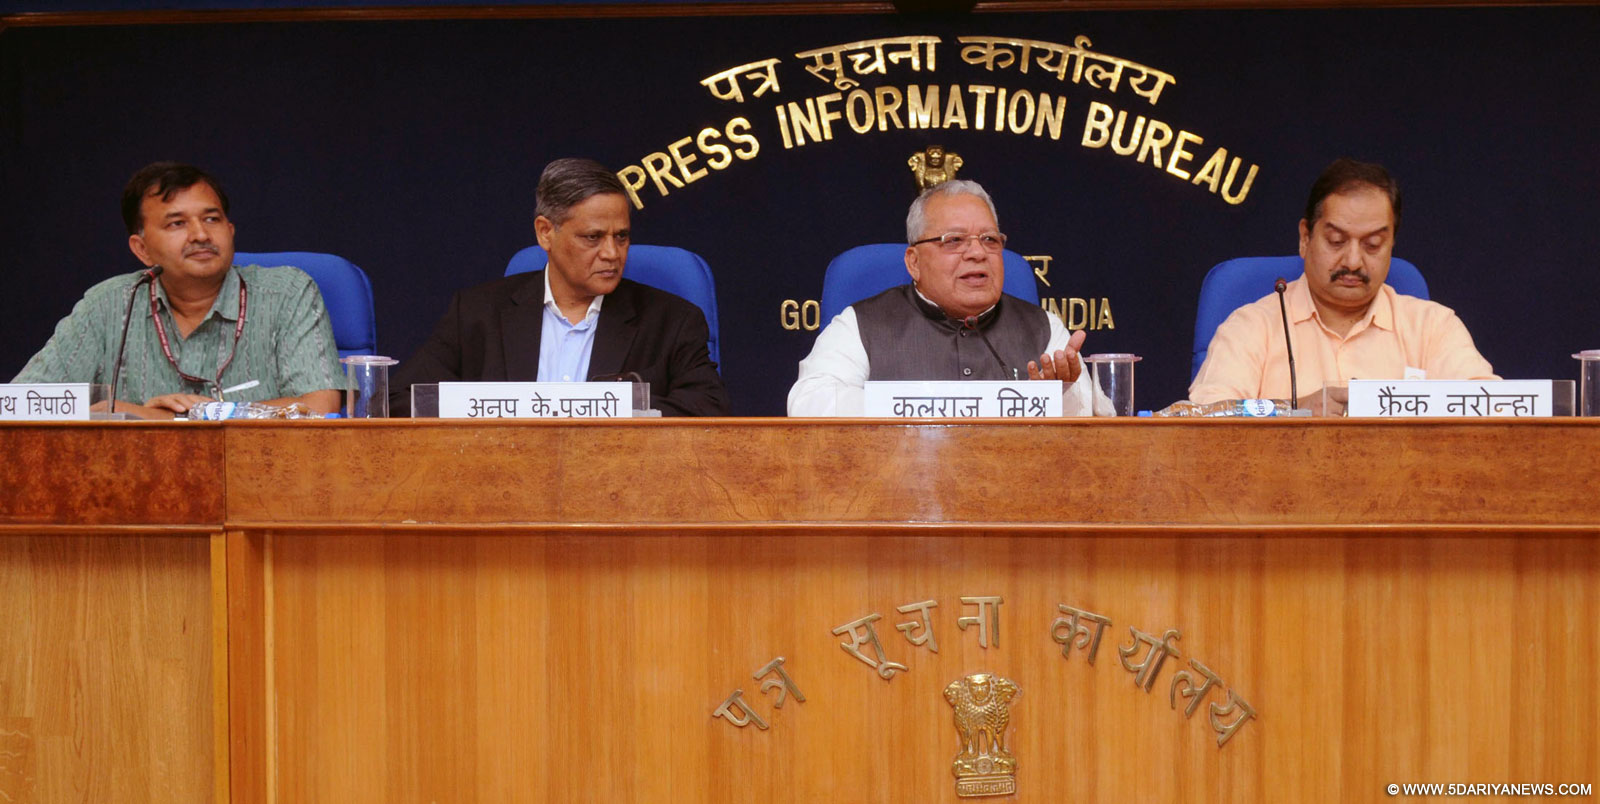 The Union Minister for Micro, Small and Medium Enterprises, Shri Kalraj Mishra address a press conference on “Udyog Aadhar Memorandum” a simplified registration format for MSMEs, in New Delhi on October 06, 2015. The Secretary, Ministry of Micro, Small & Medium Enterprises and Steel, Dr. Anup K. Pujari and the Director General (M&C), Press Information Bureau, Shri A.P. Frank Noronha are also seen.